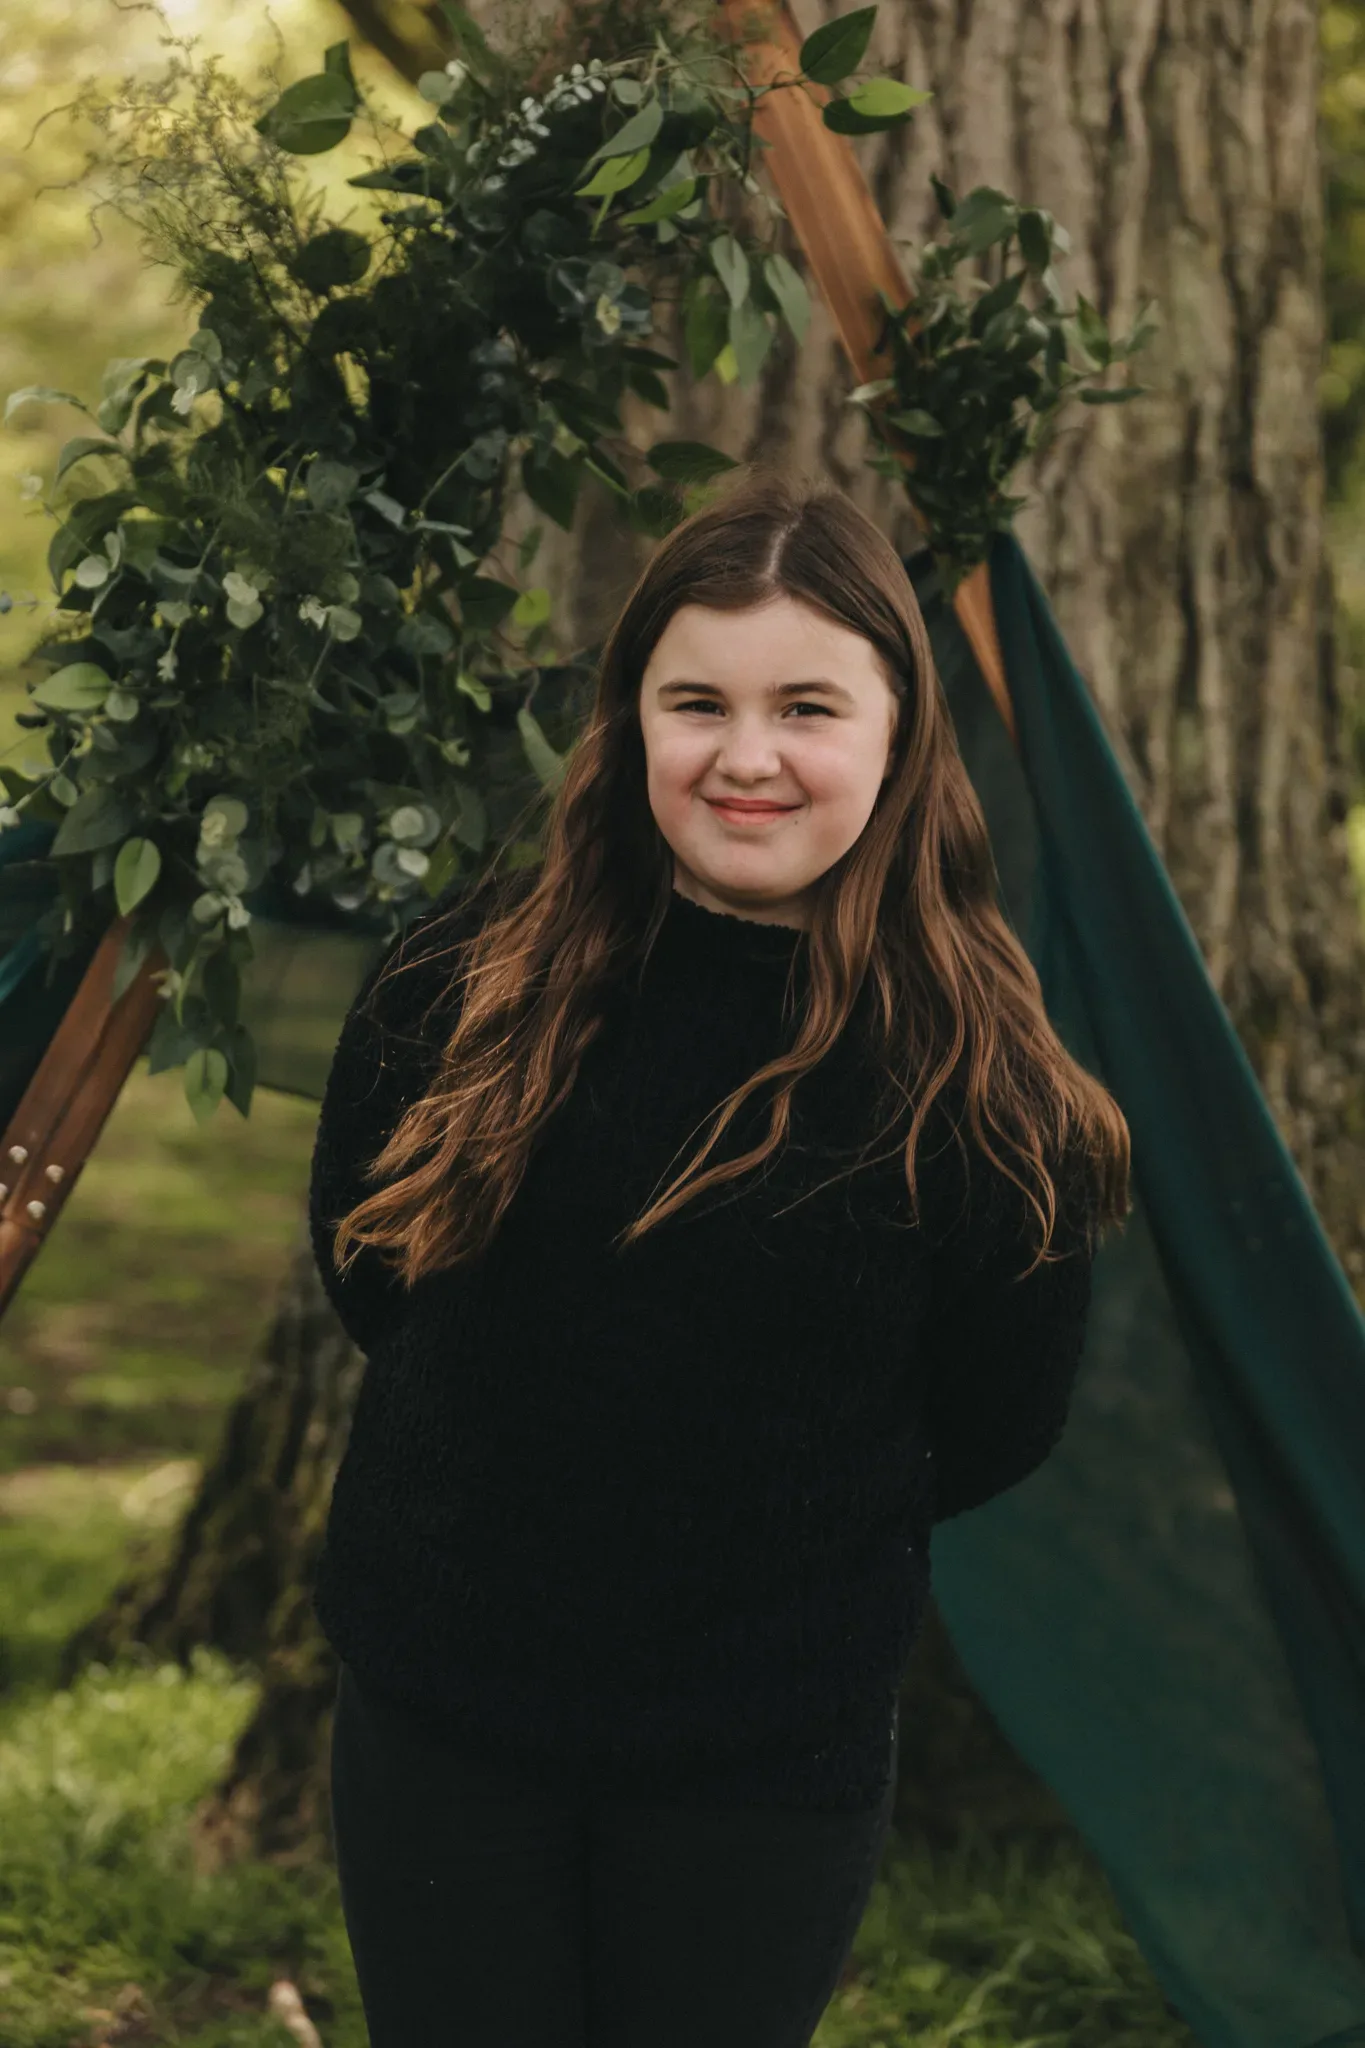 A young girl with long brown hair and wearing a black sweater smiles at the camera, standing in front of a green tent and a decorative greenery arch in a lush, outdoor setting.